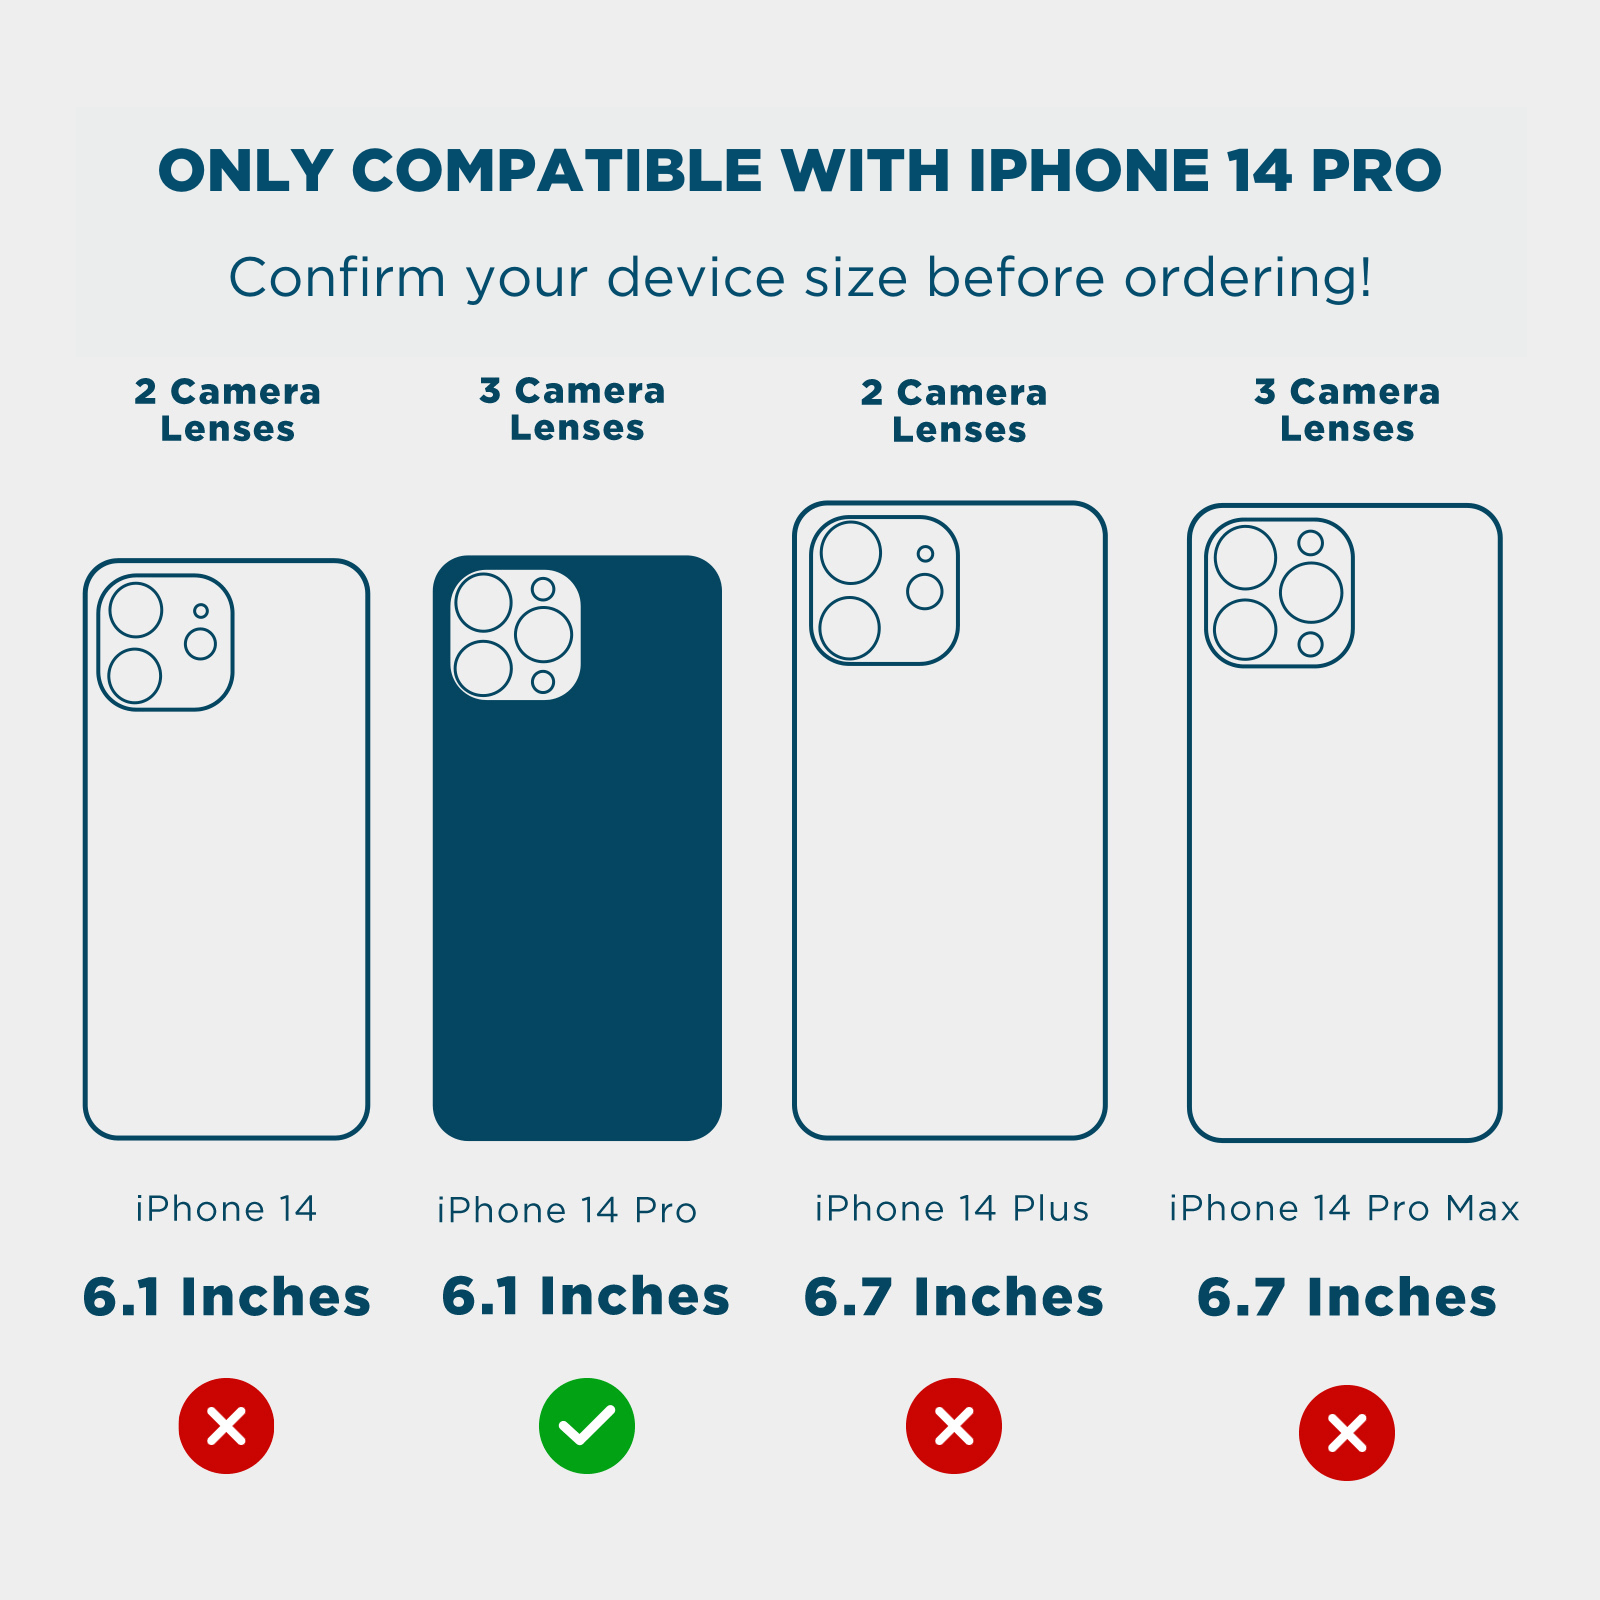 ONLY COMPATIBLE WITH IPHONE 14 PRO. CONFIRM YOUR DEVICE SIZE BEFORE ORDERING. 2 CAMERA LENSES, 3 CAMERA LENSES, 2 CAMERA LENSES, 3 CAMERA LENSES, 6.1, 6.1, 6.7, 6.7. COLOR::PEARL